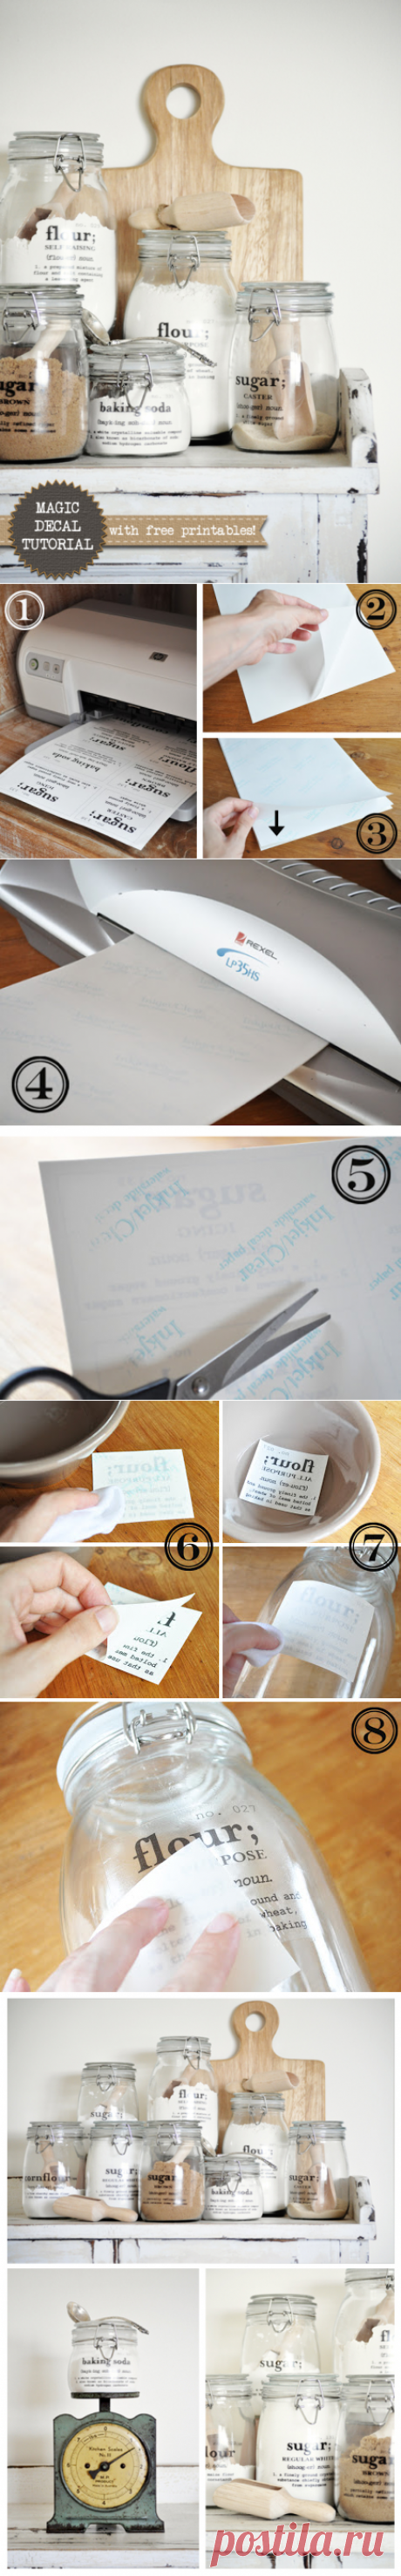 The Perfect Wife » Decal Transfer Tutorial with Free Printables